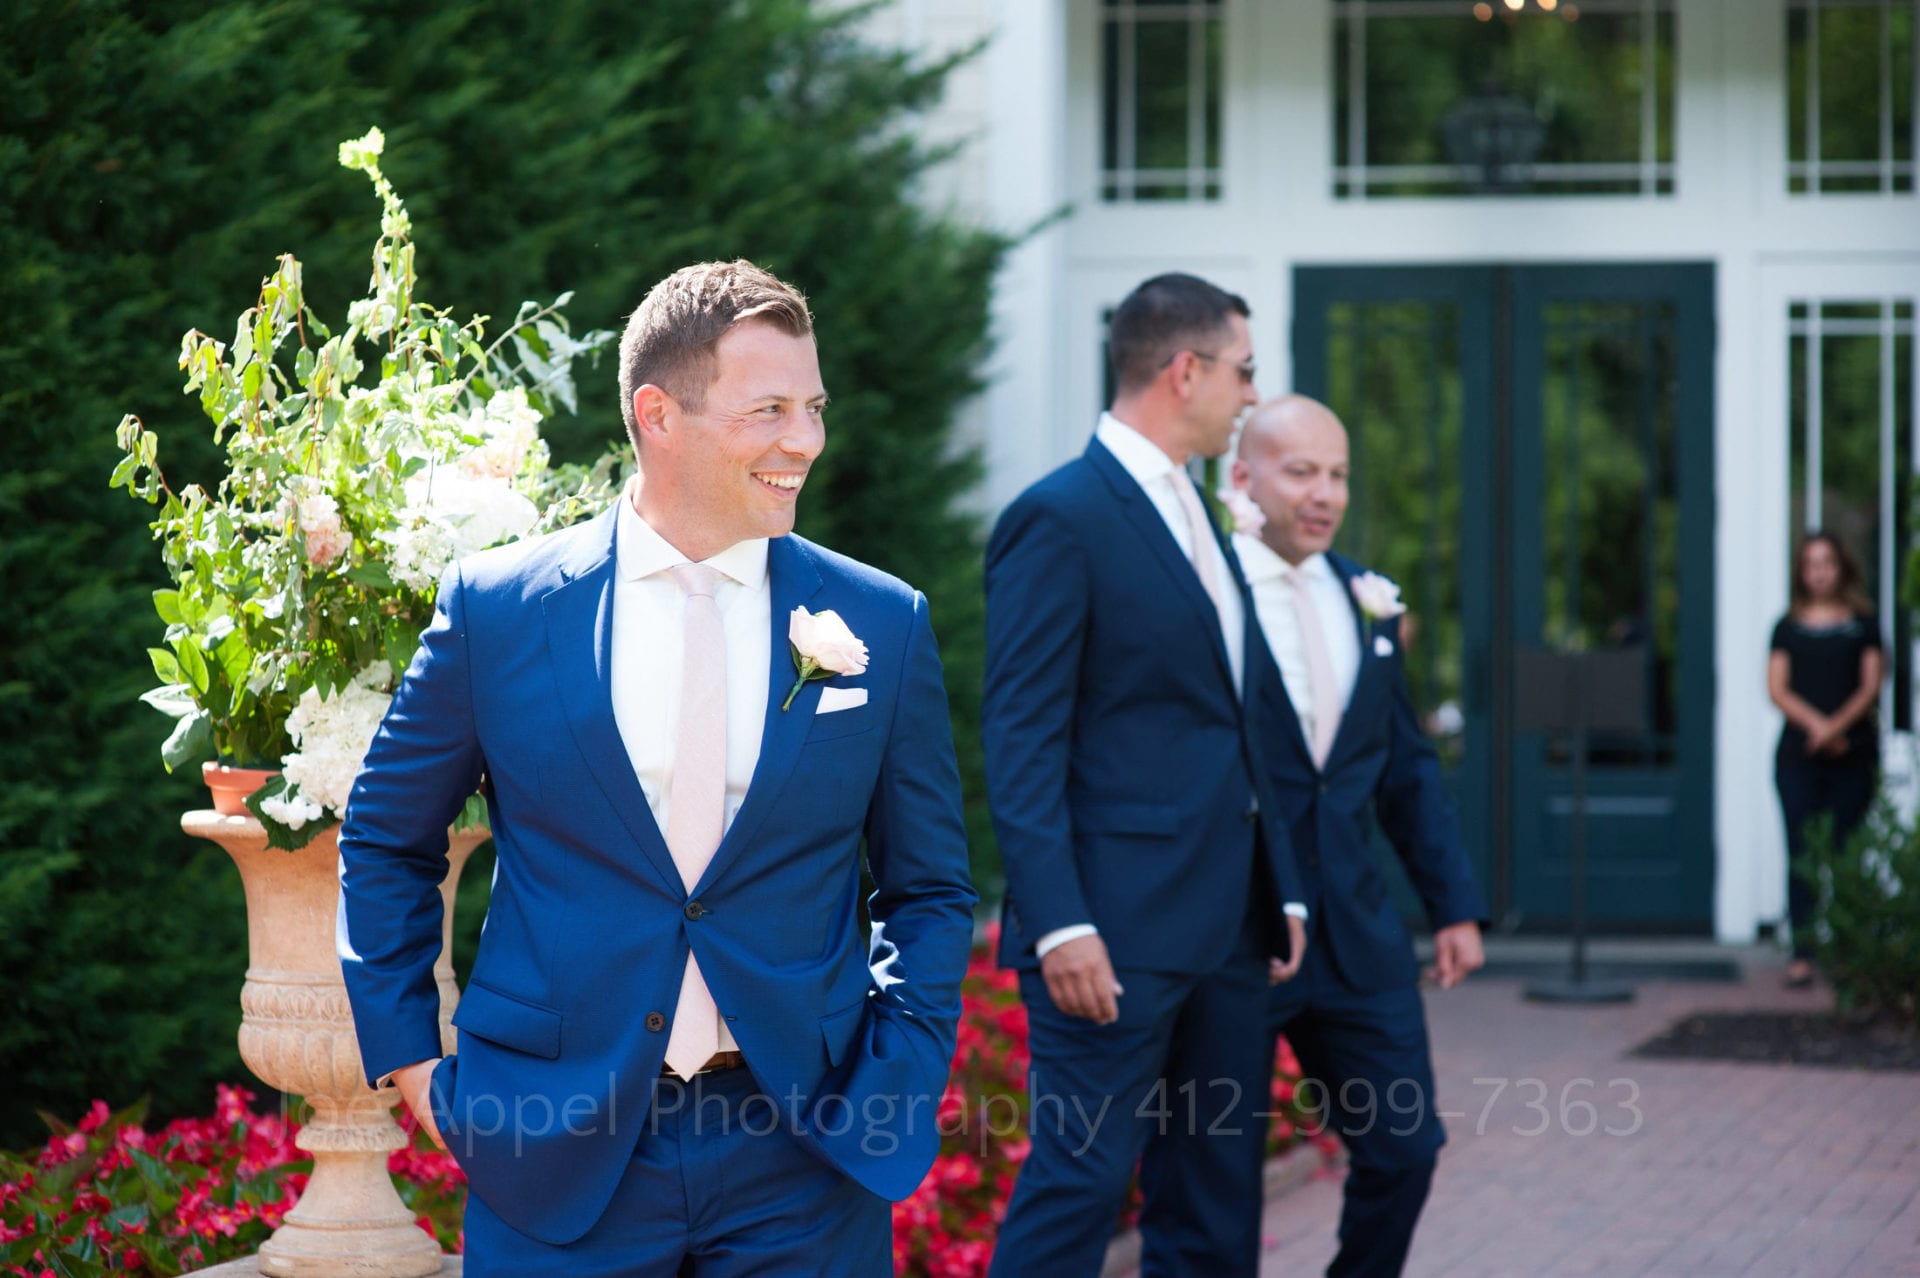 A groom wearing a blue suit and pink tie smiles large as he walks into a courtyard with his hands in his pockets and looks to the right during their Omni Bedford Springs Resort Wedding.